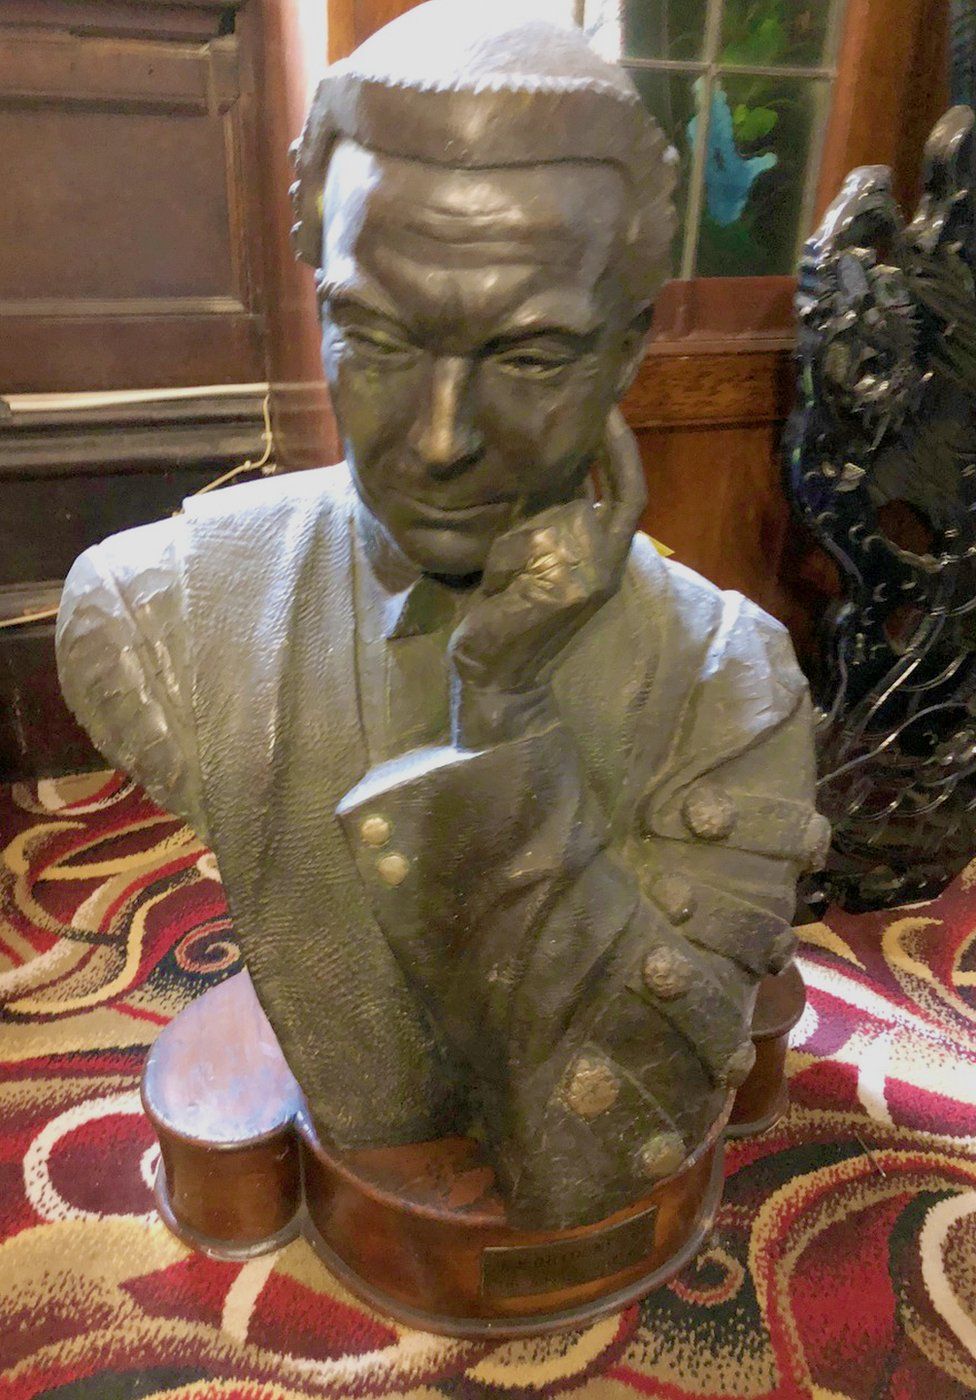 A bust of RR Brydone gifted by the Cape Town authorities